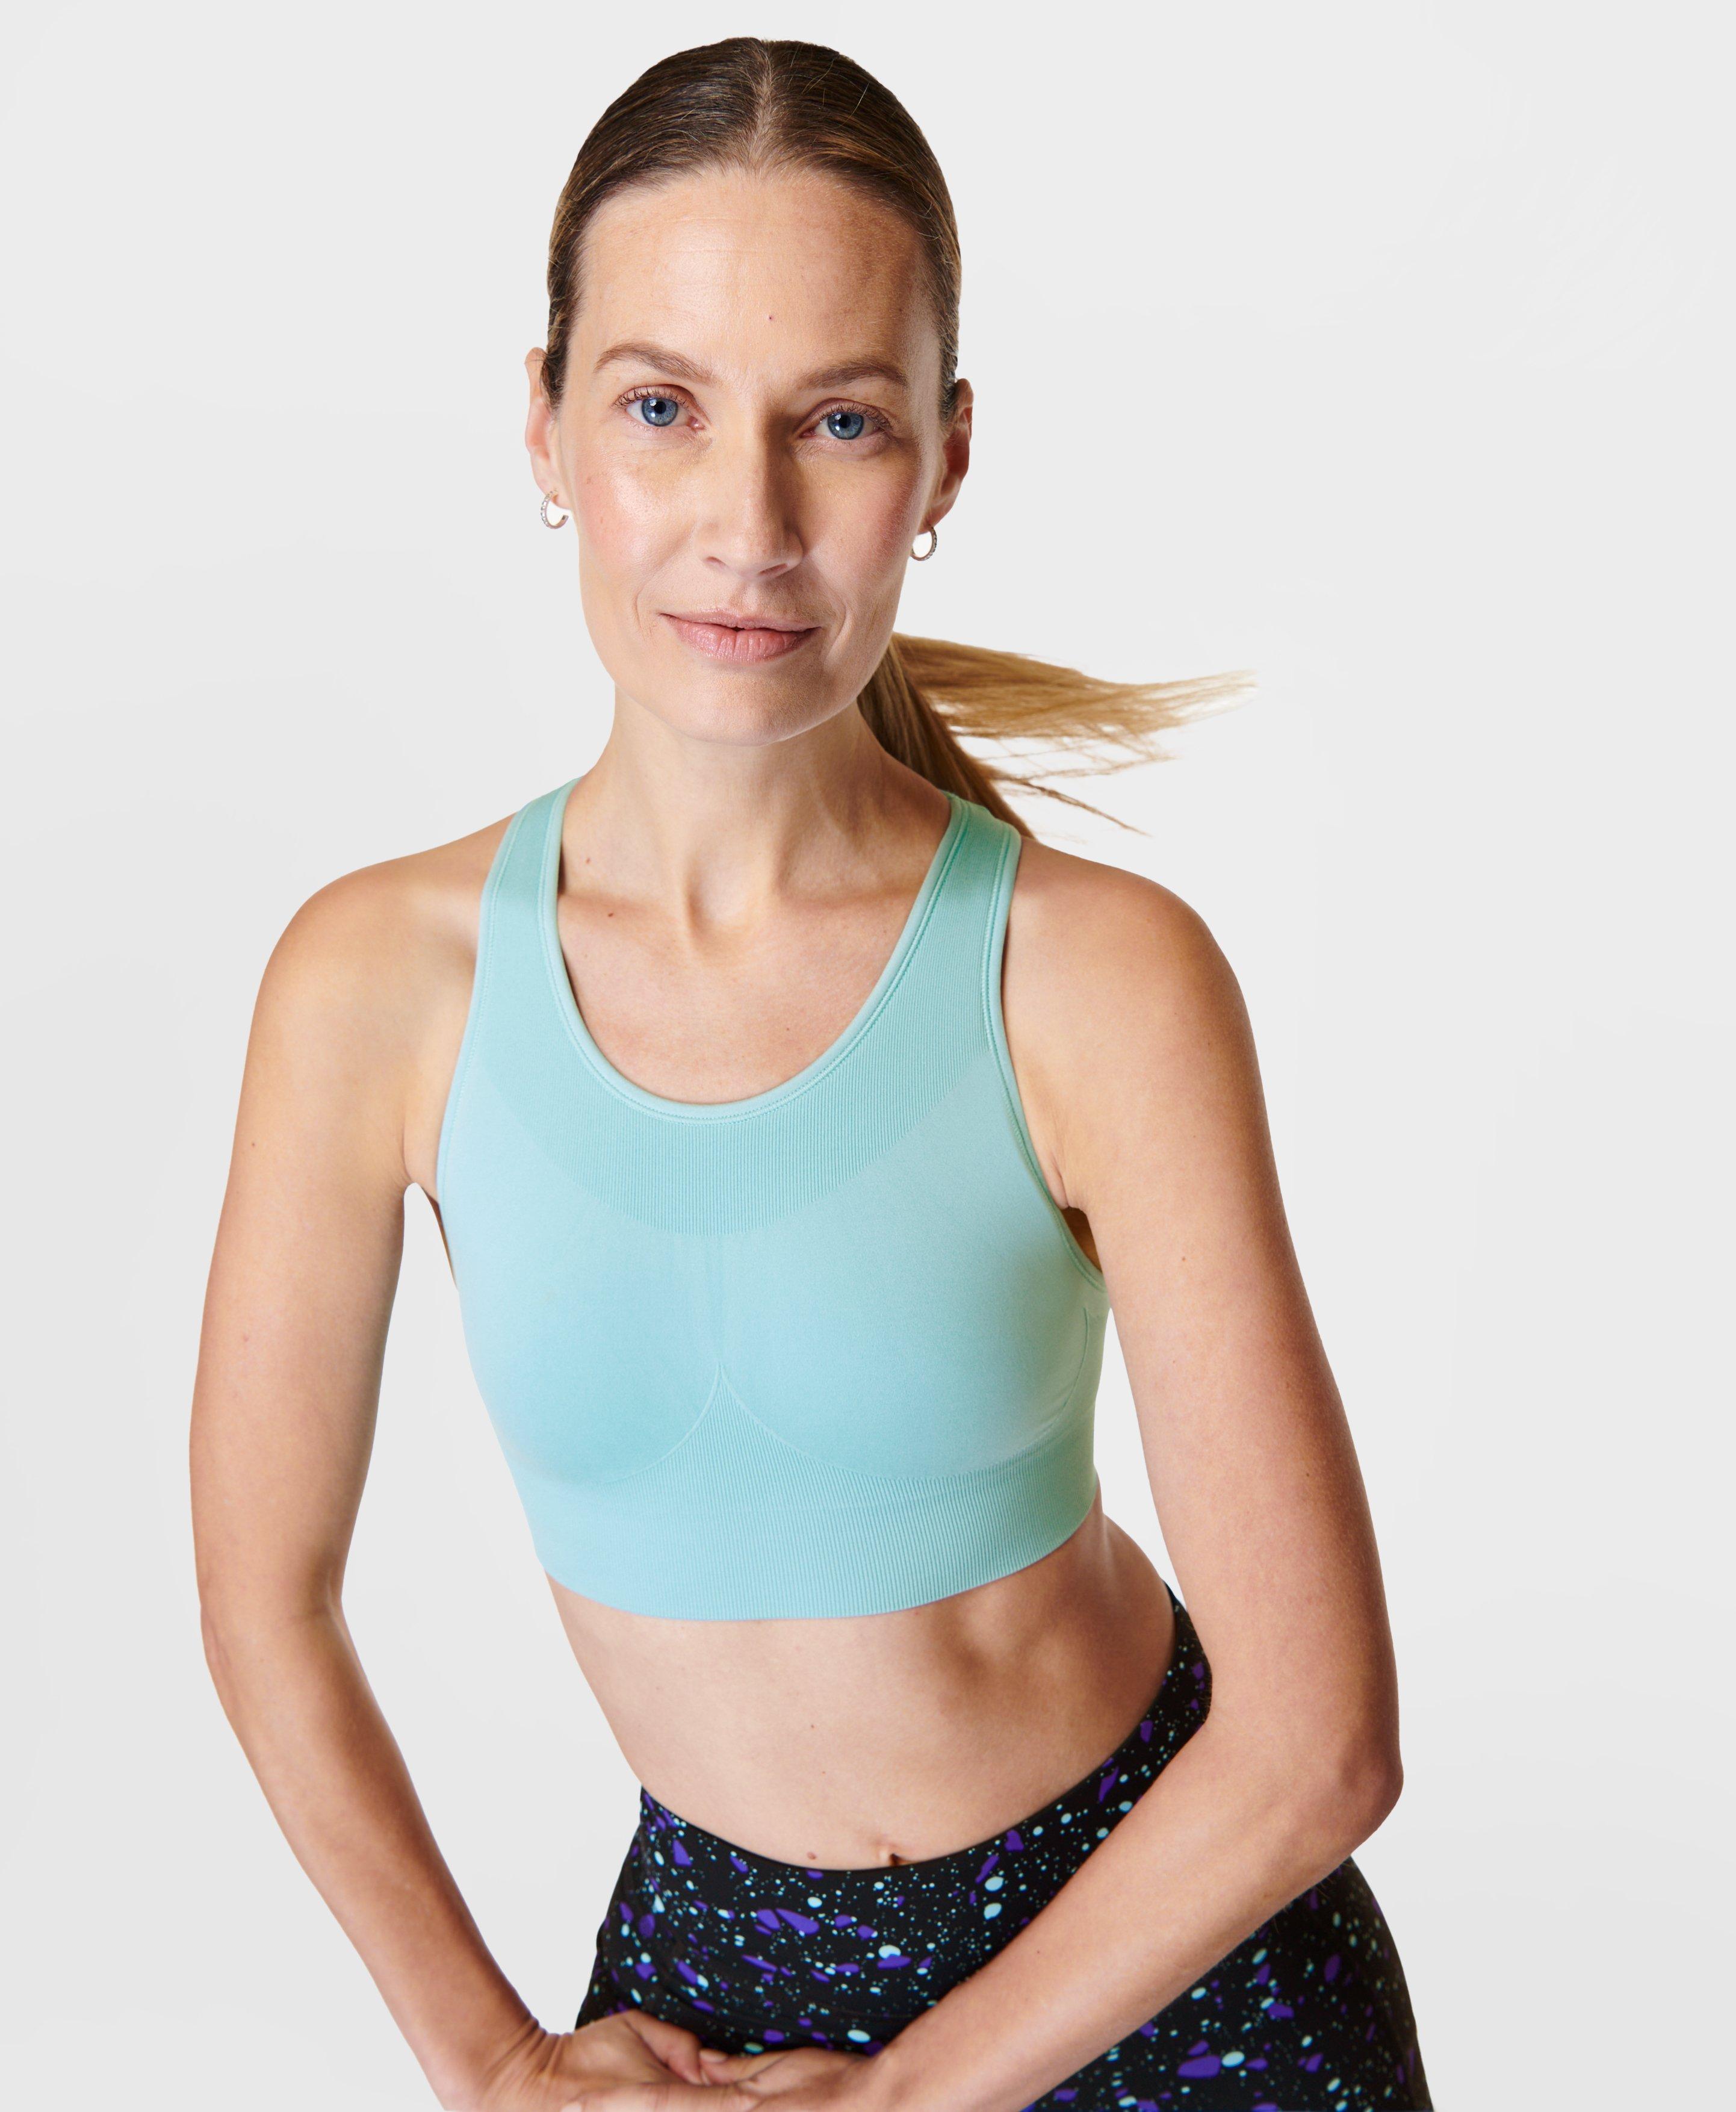 Post workout sweat fit pic! Invigorate bra (size 6) in ancient